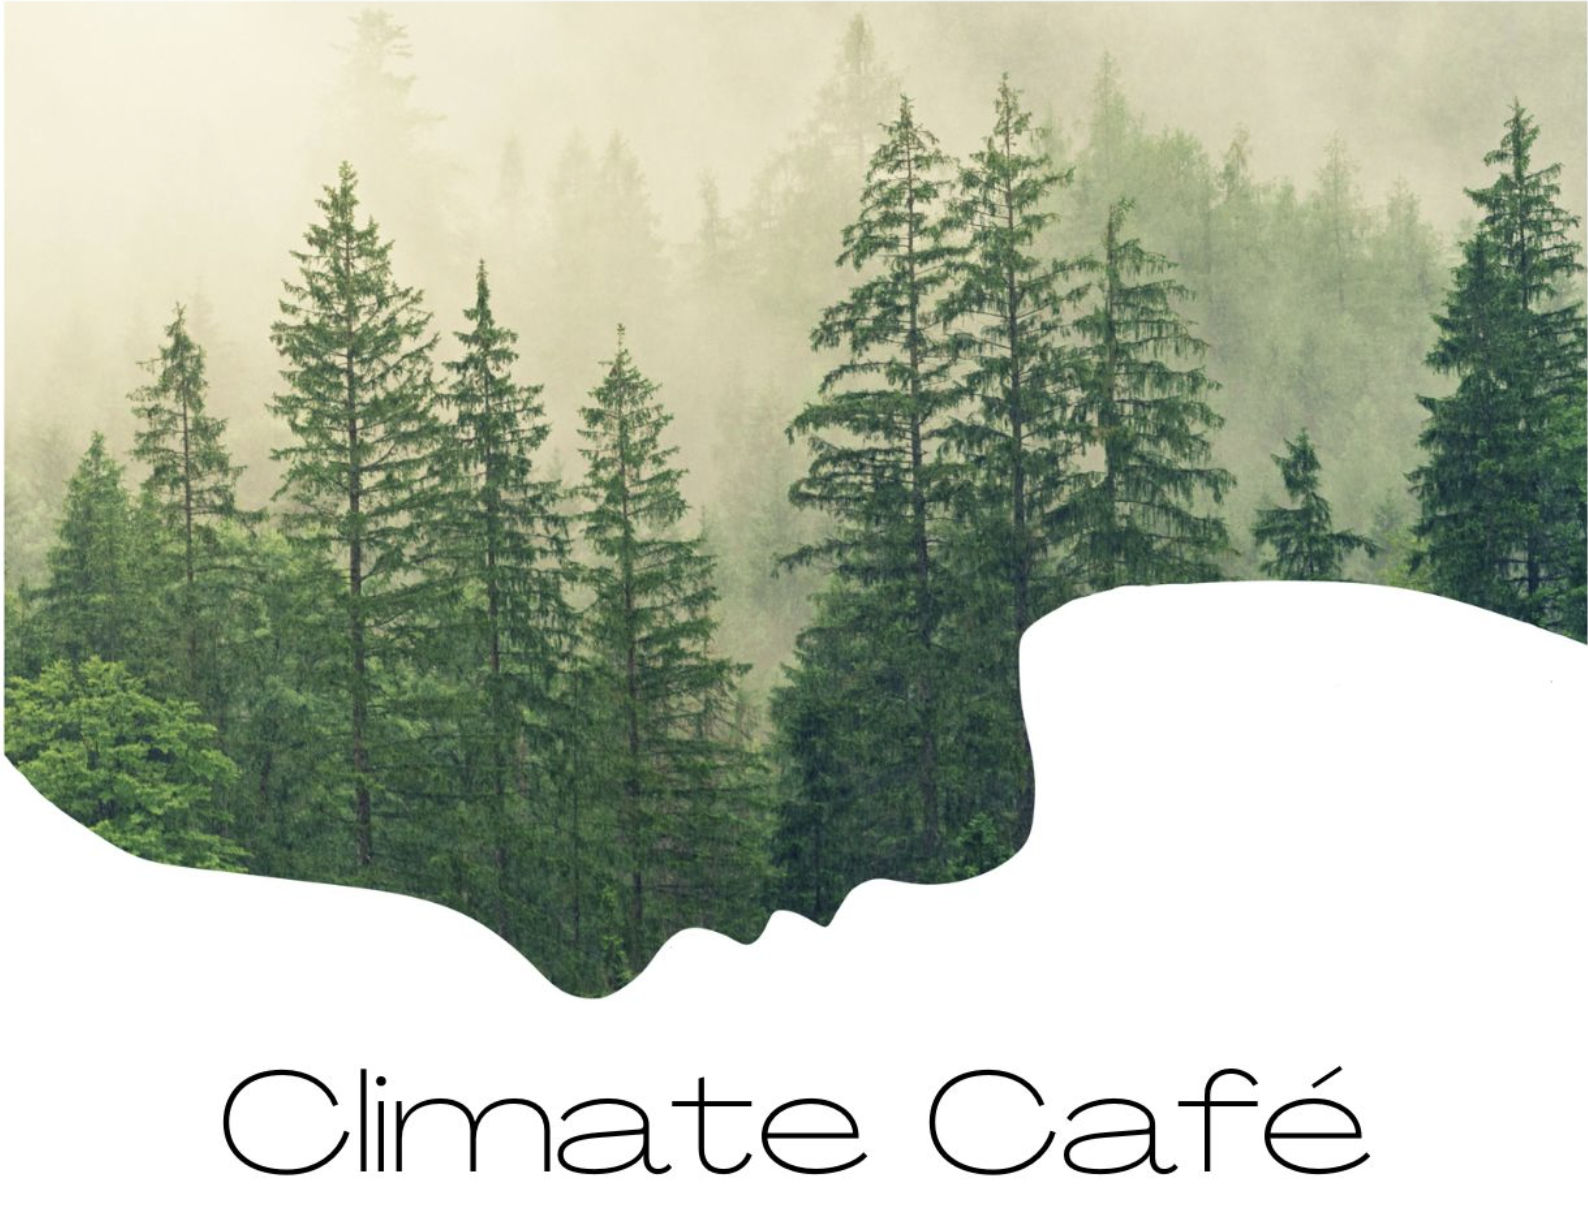 Misty pine wood with the text "Climate Cafe" 